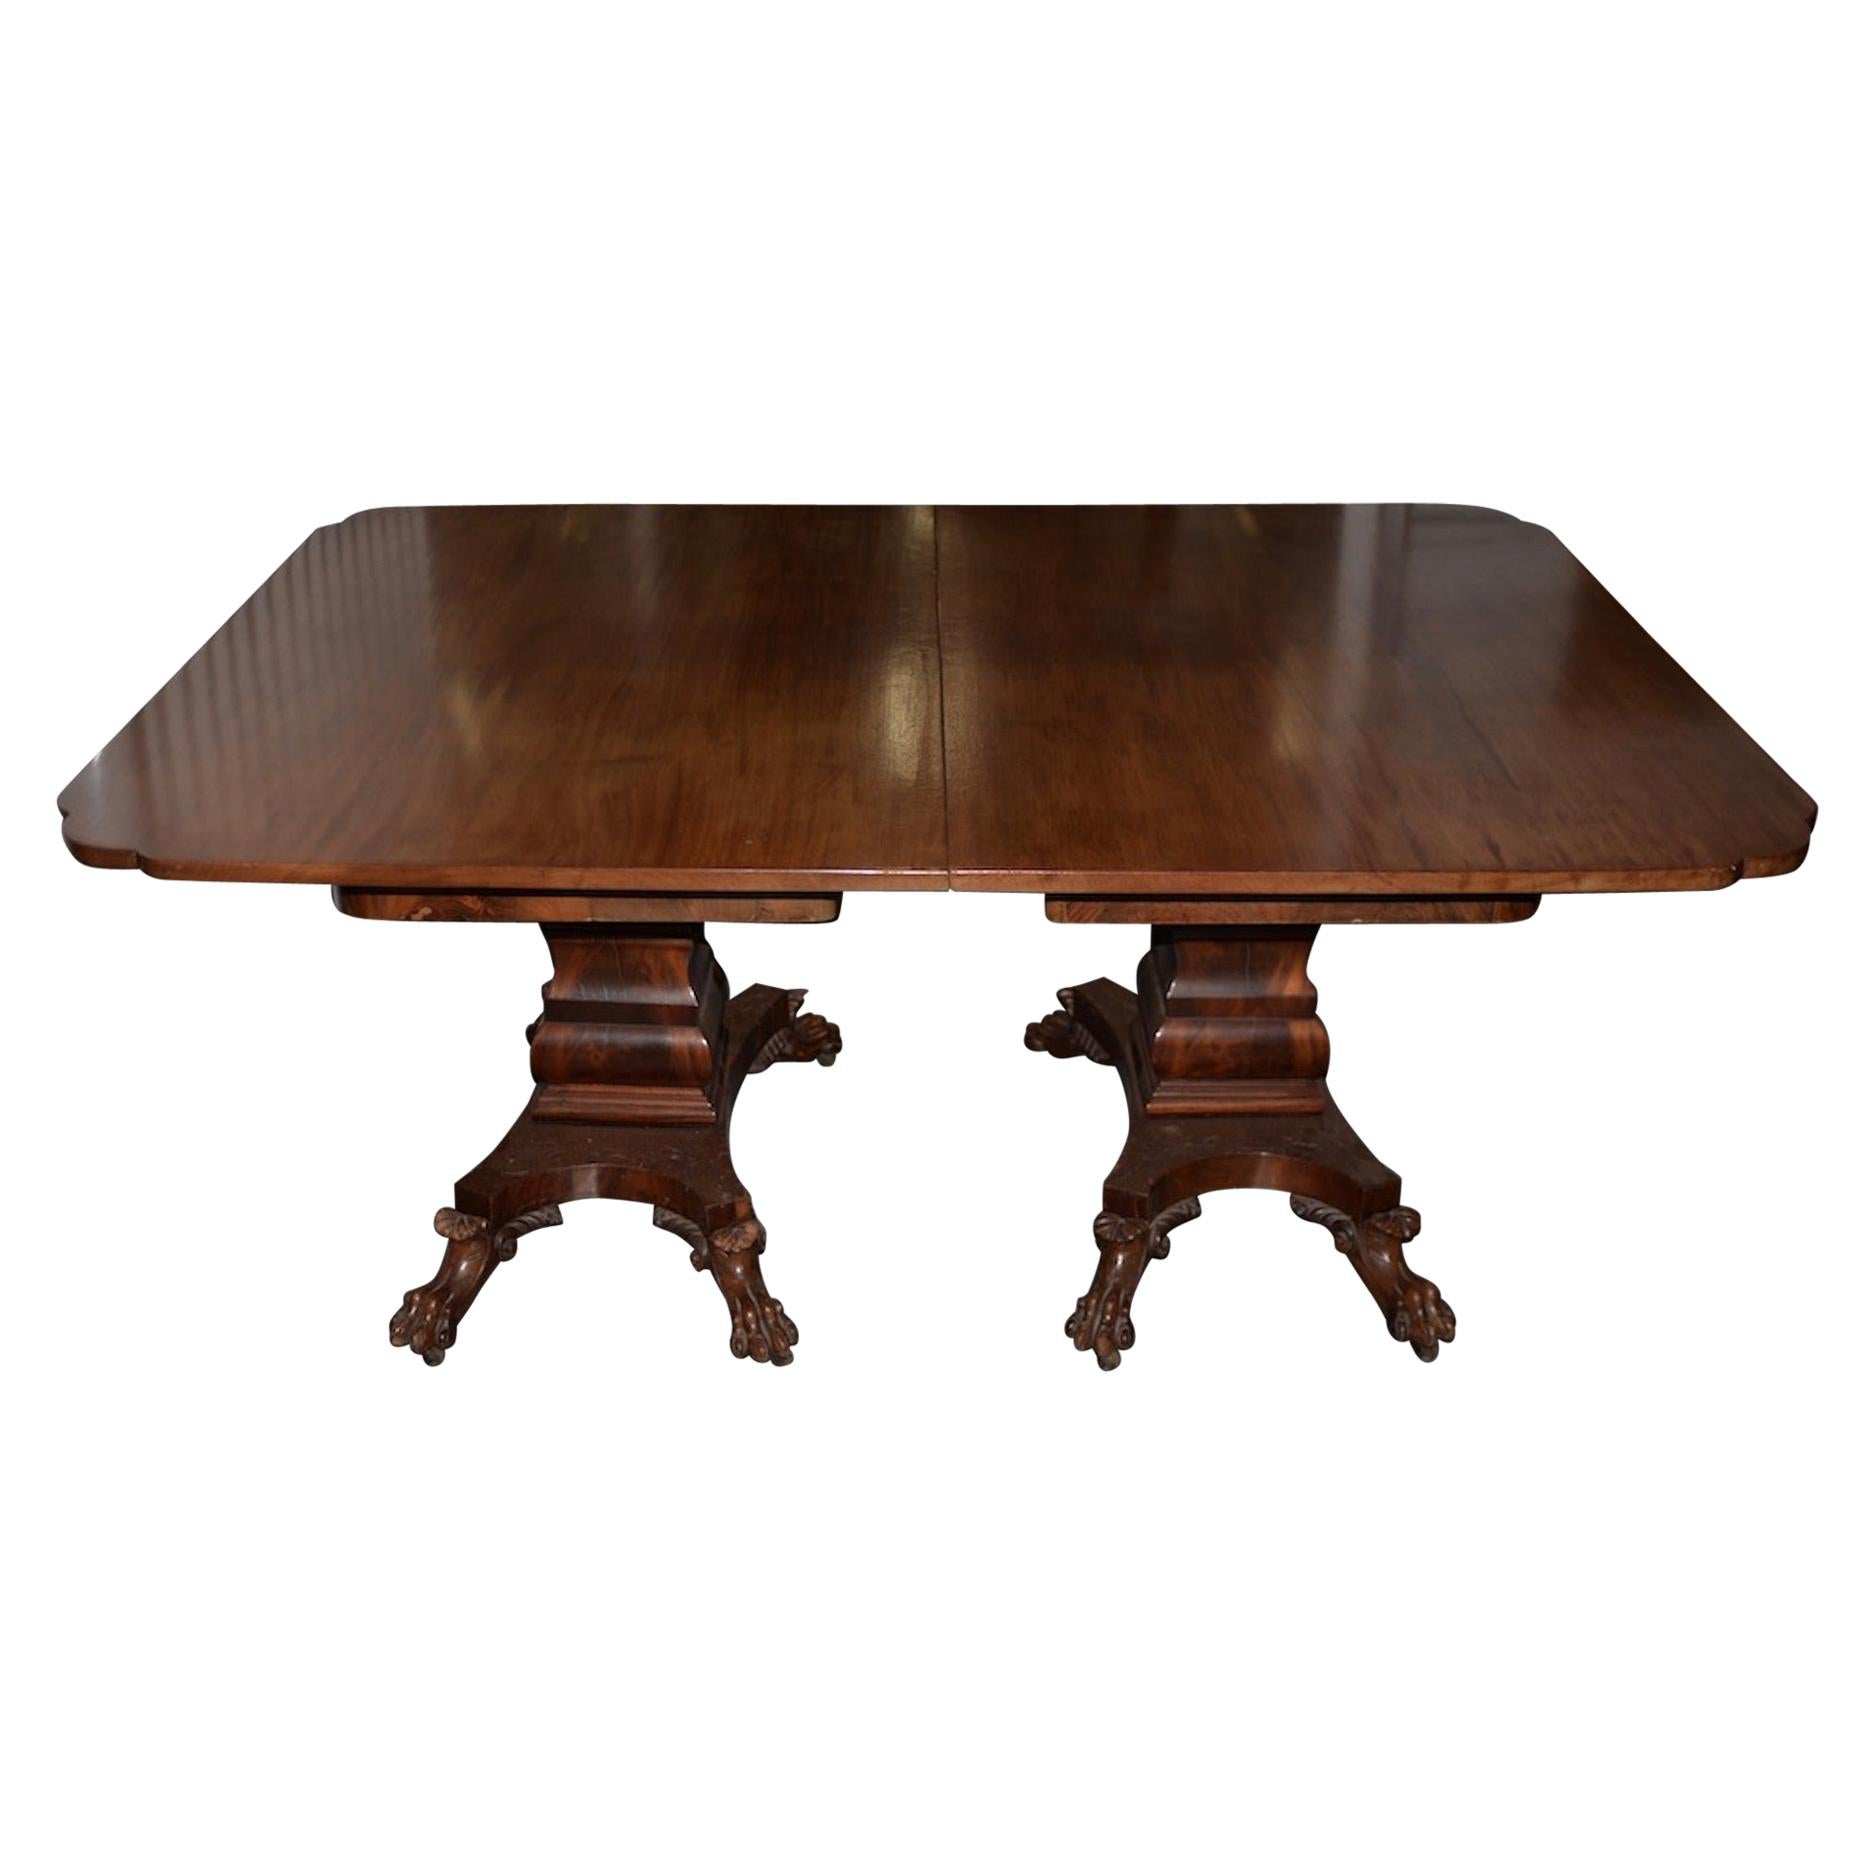 William IV Mahogany Dining Table with Lions Paw Feet, 19th Century For Sale